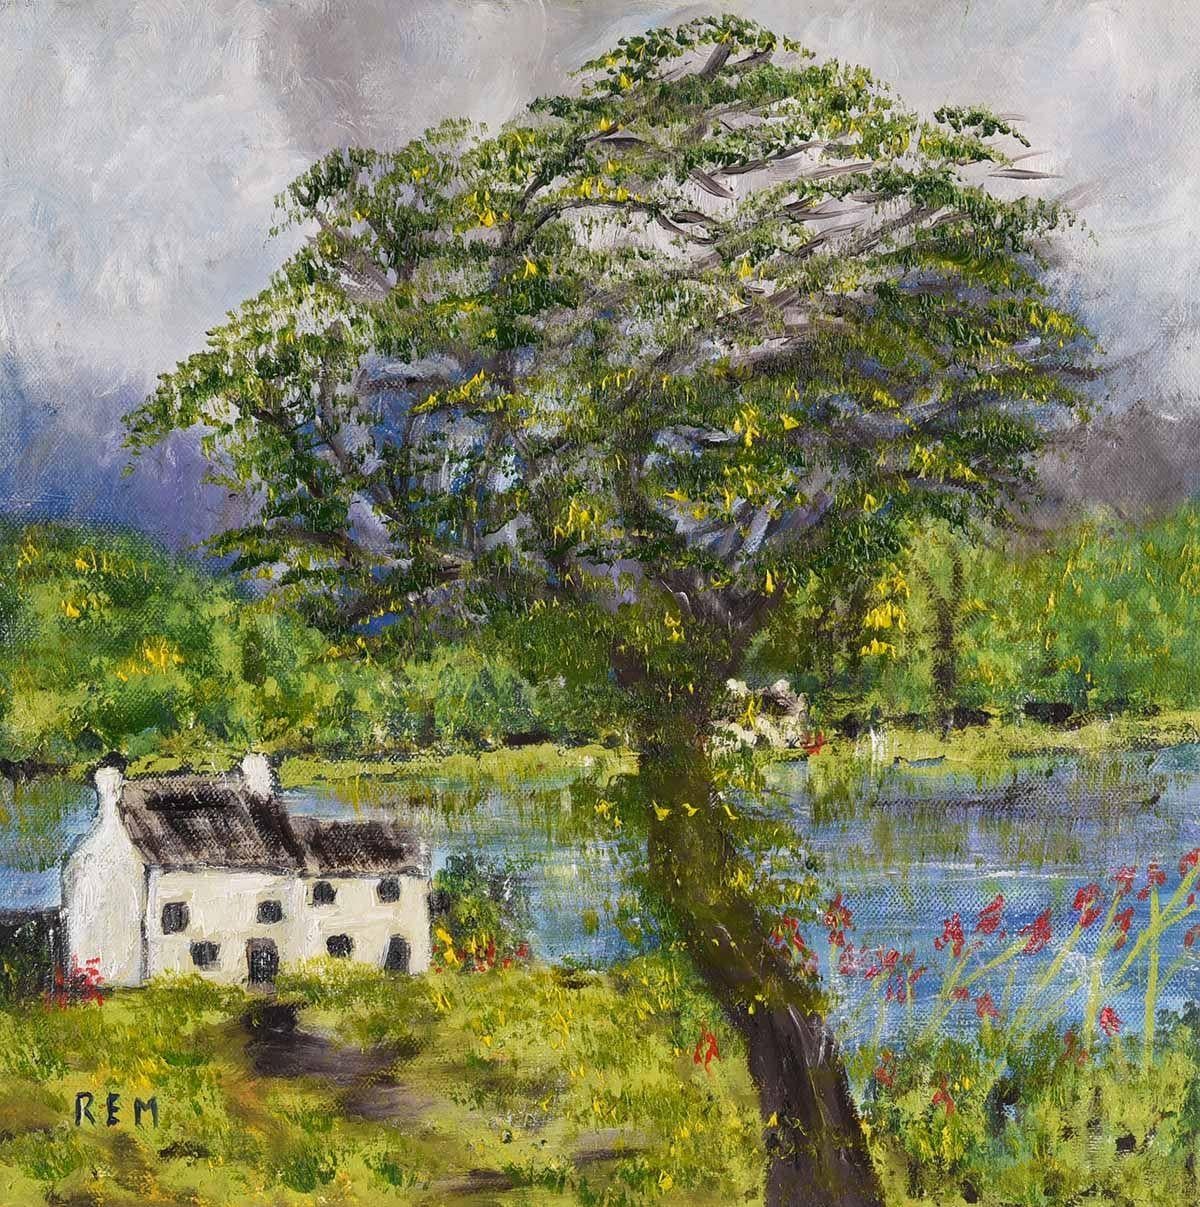 Abstract Landscape with Farm House and Tree in Ireland by British Artist